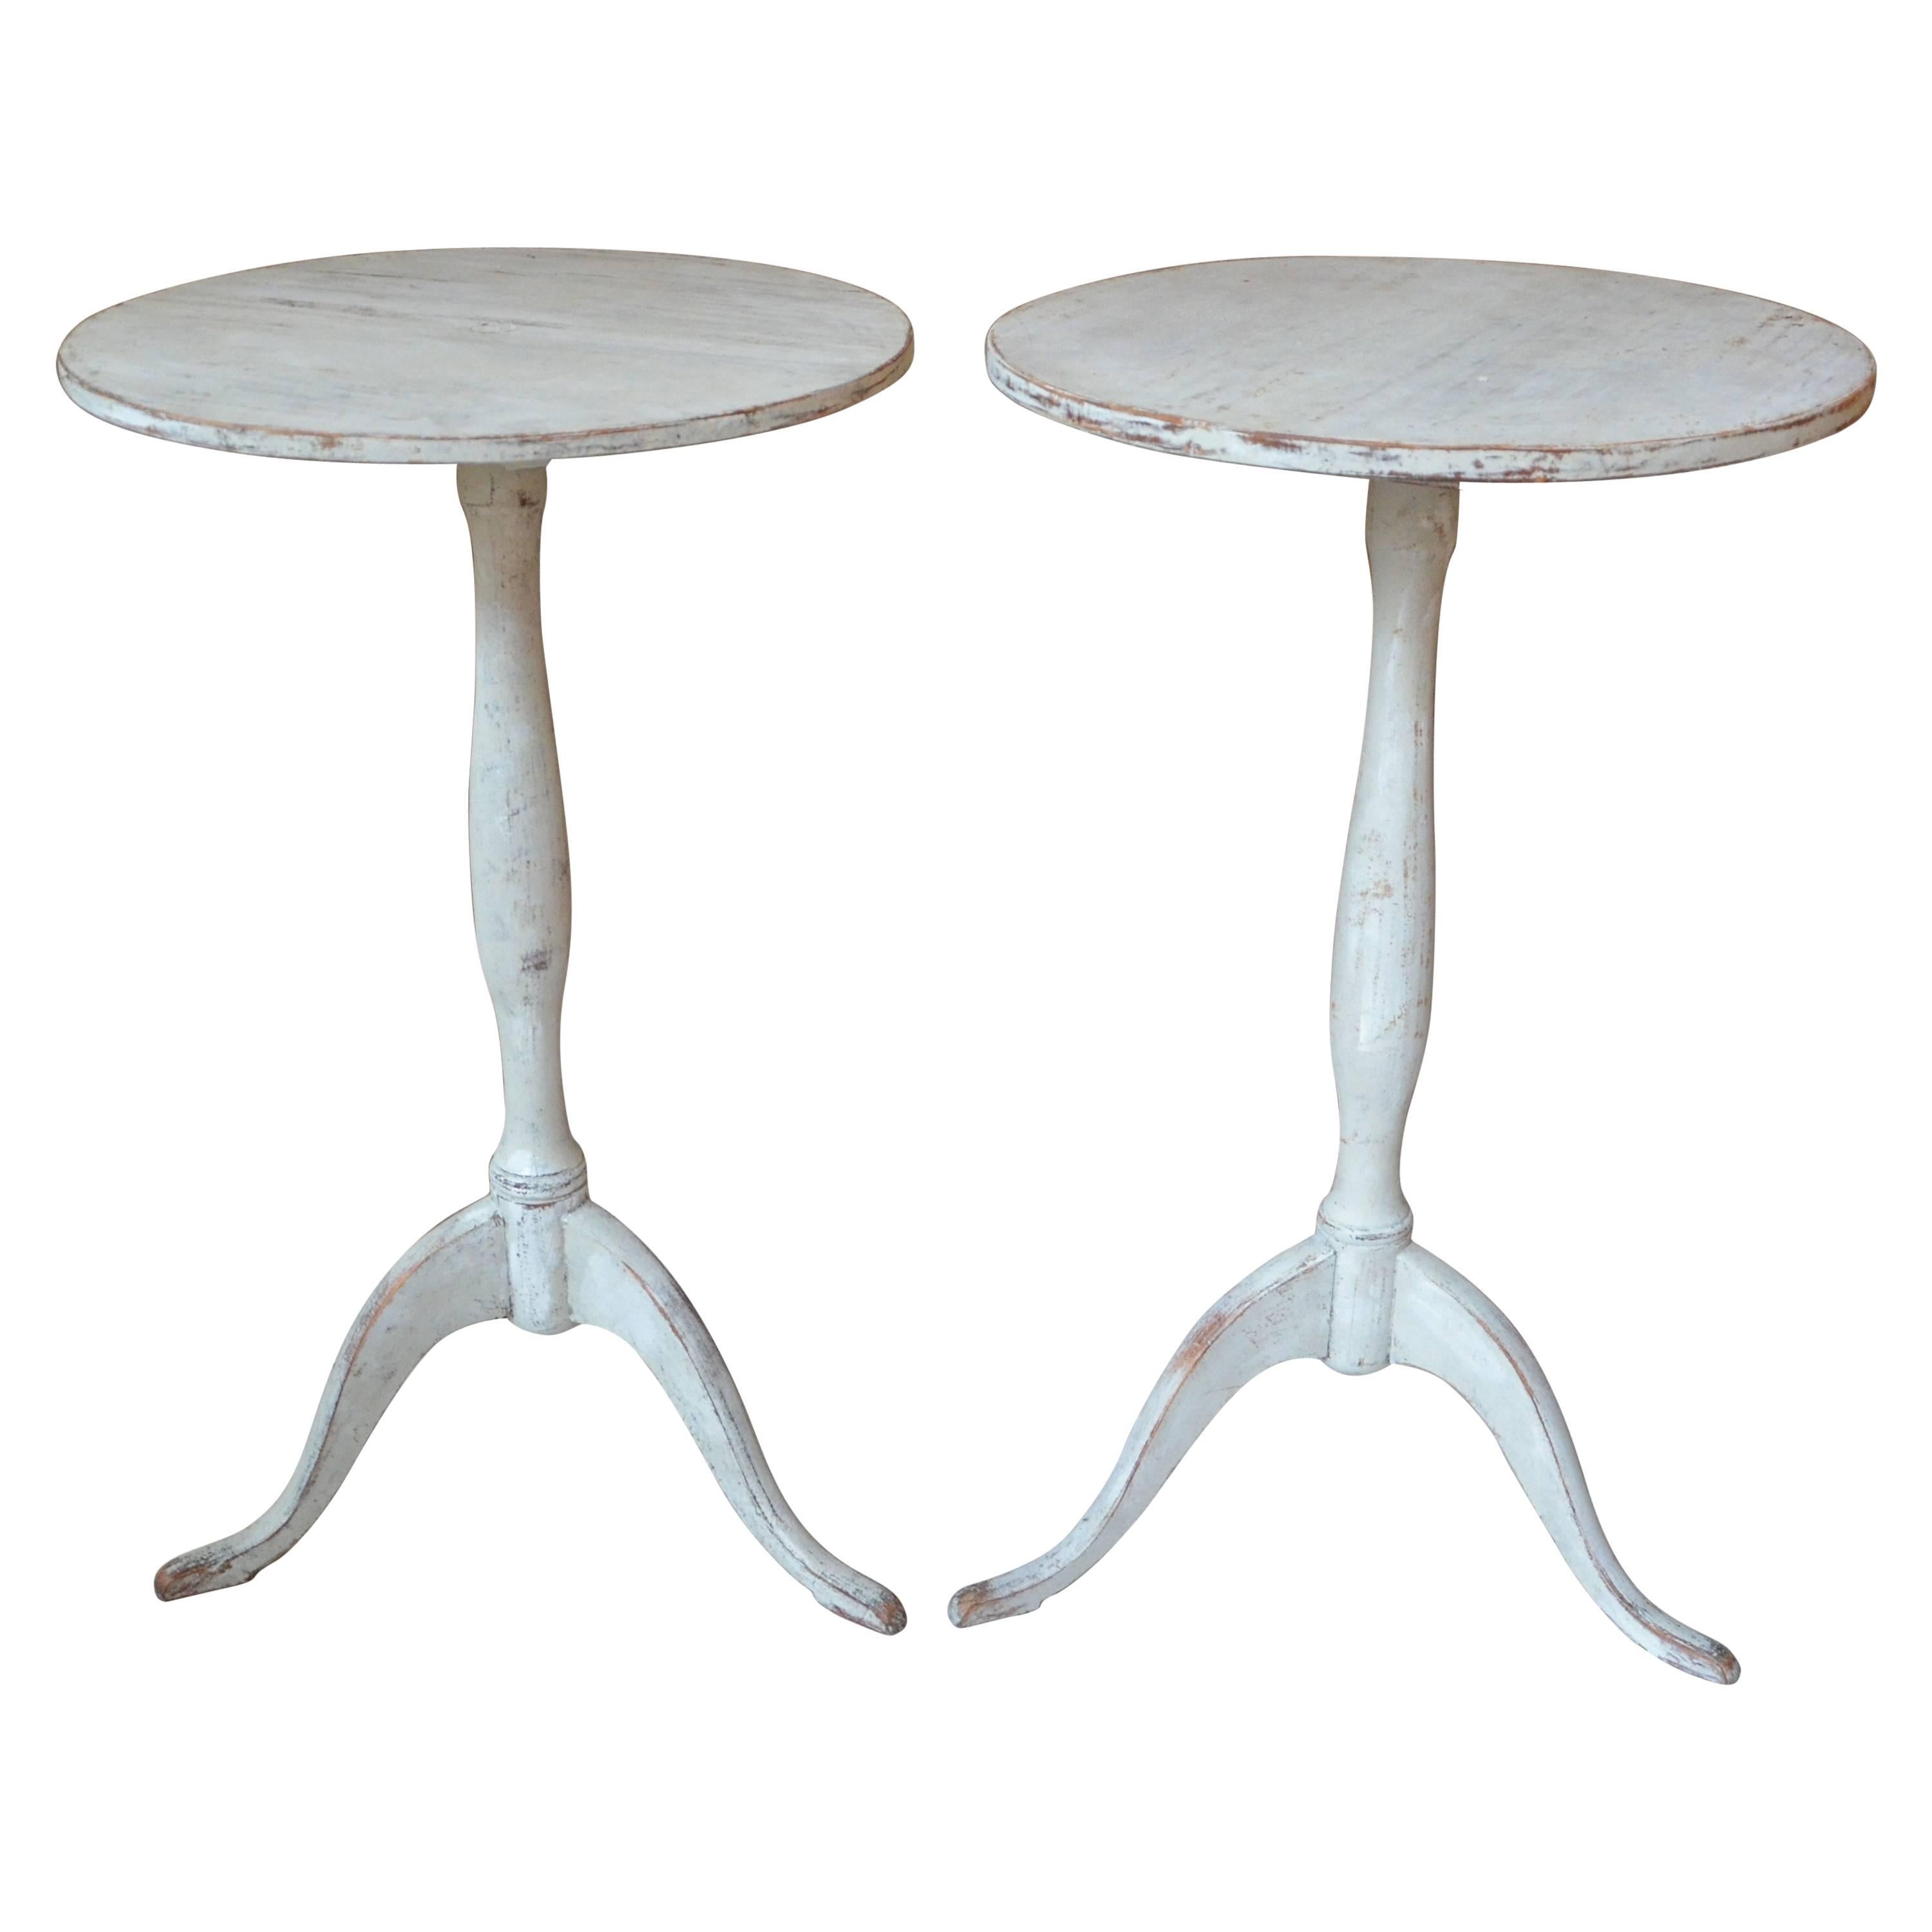 Pair of Swedish Early 19th Century Pedestal Tables